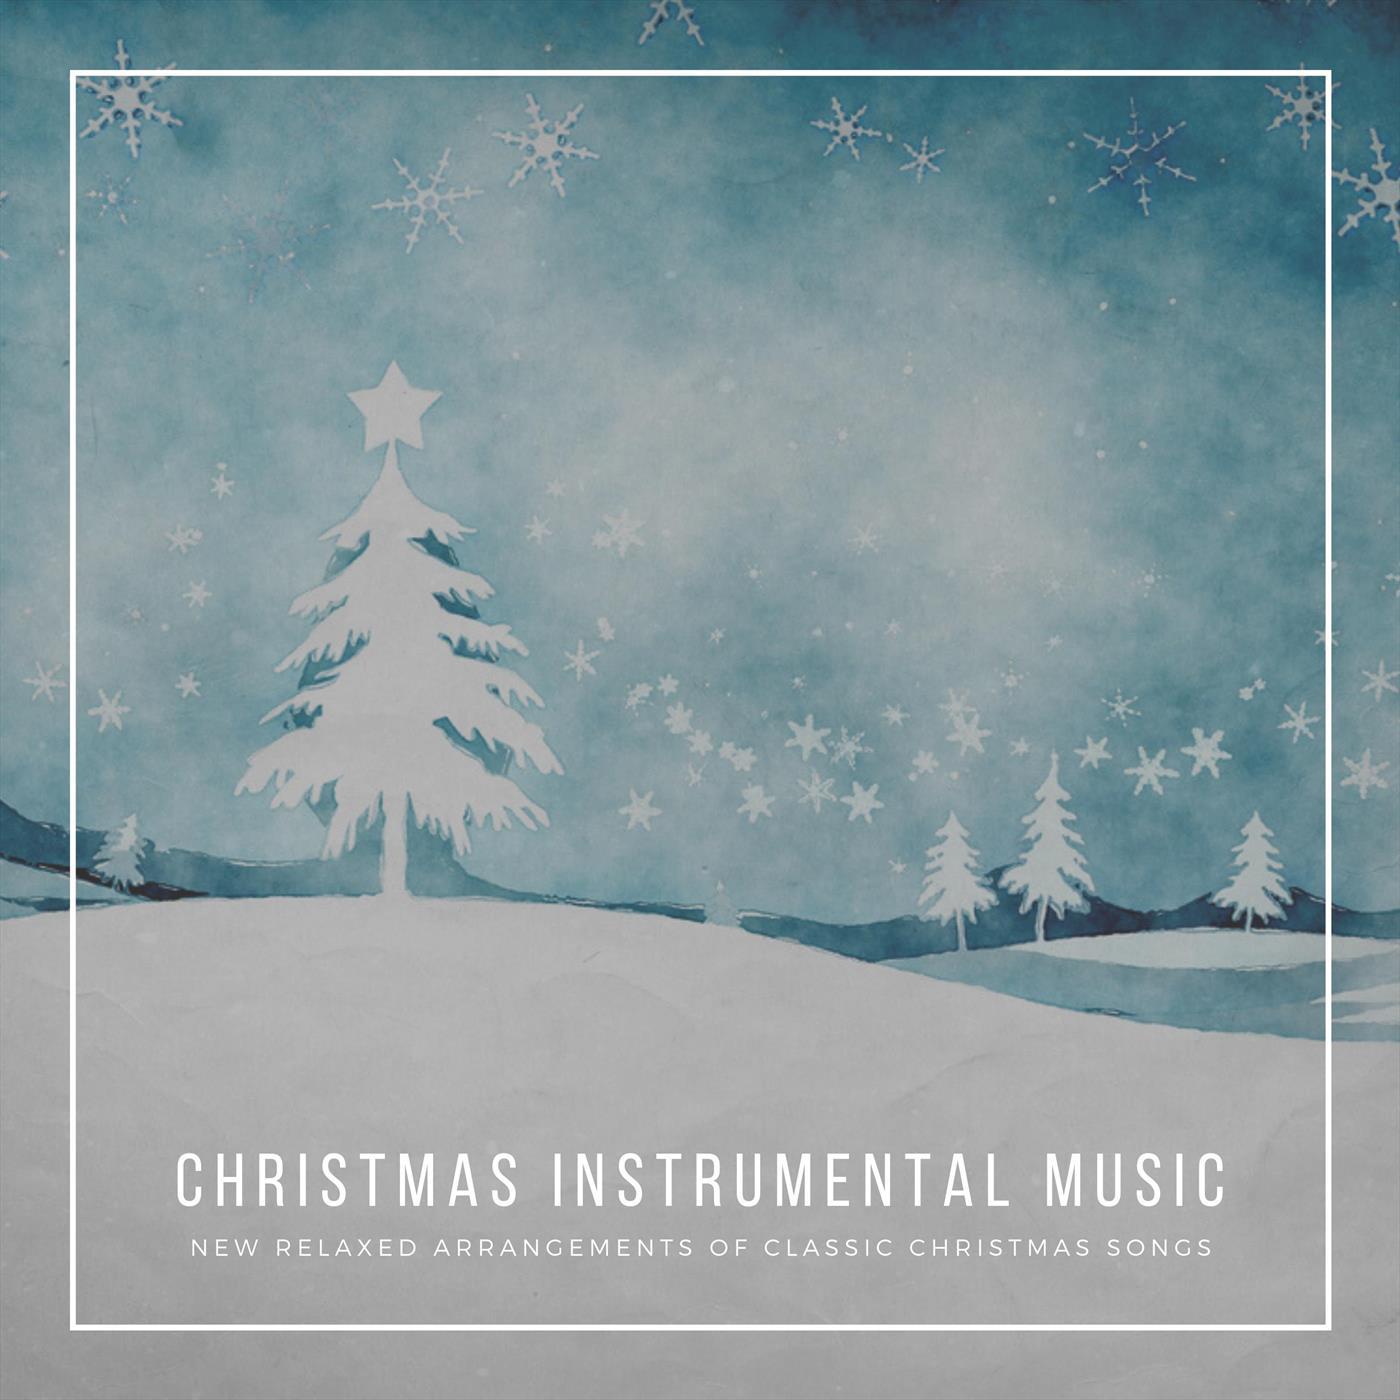 Christmas Instrumental Music: New Relaxed Arrangements of Classic Christmas Songs